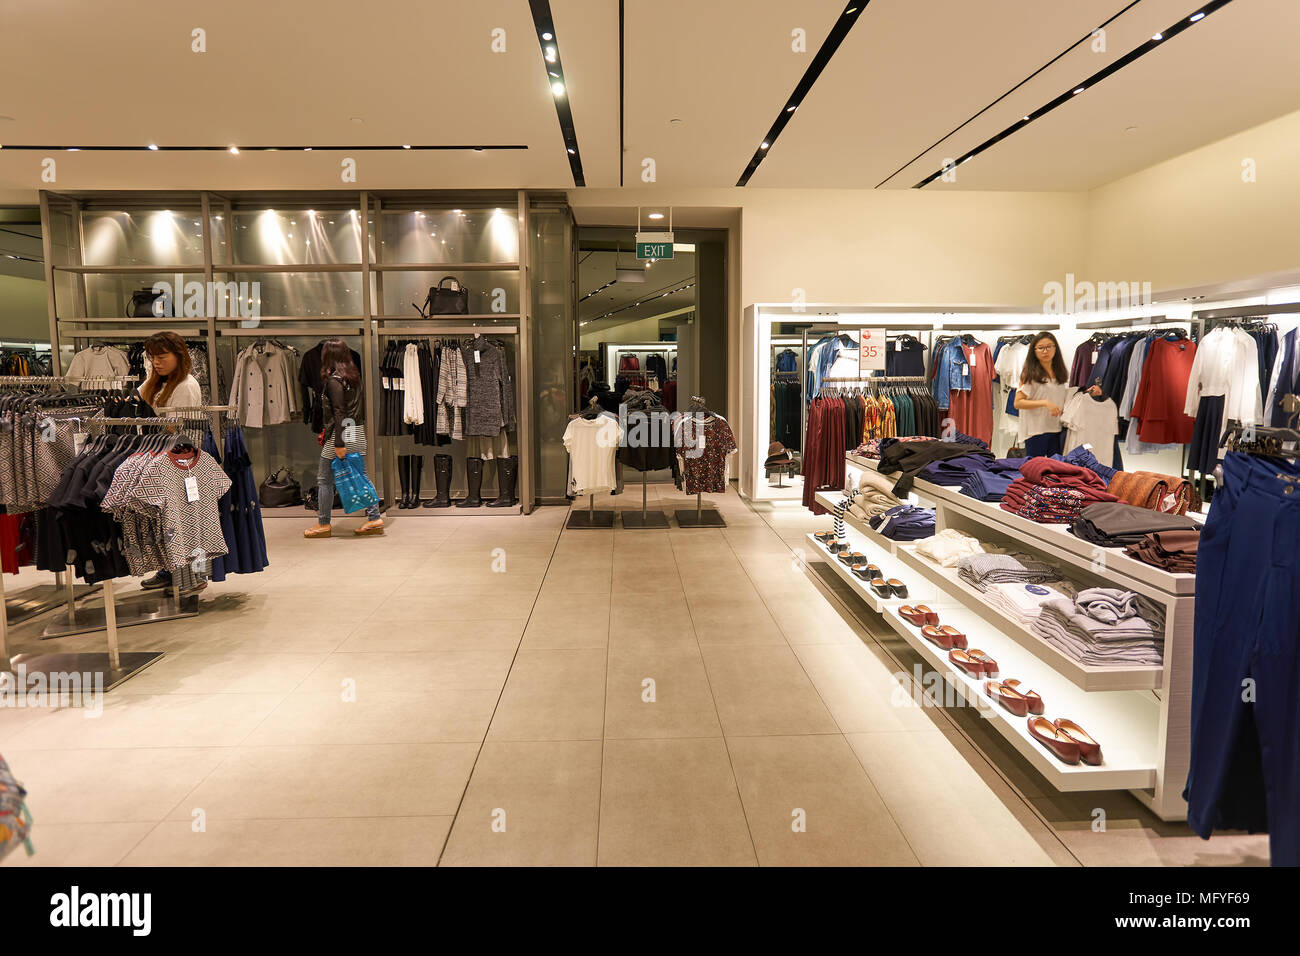 SINGAPORE - NOVEMBER 08, 2015: interior of a Zara store. Zara is a Spanish  clothing and accessories retailer based in Arteixo, Galicia Stock Photo -  Alamy